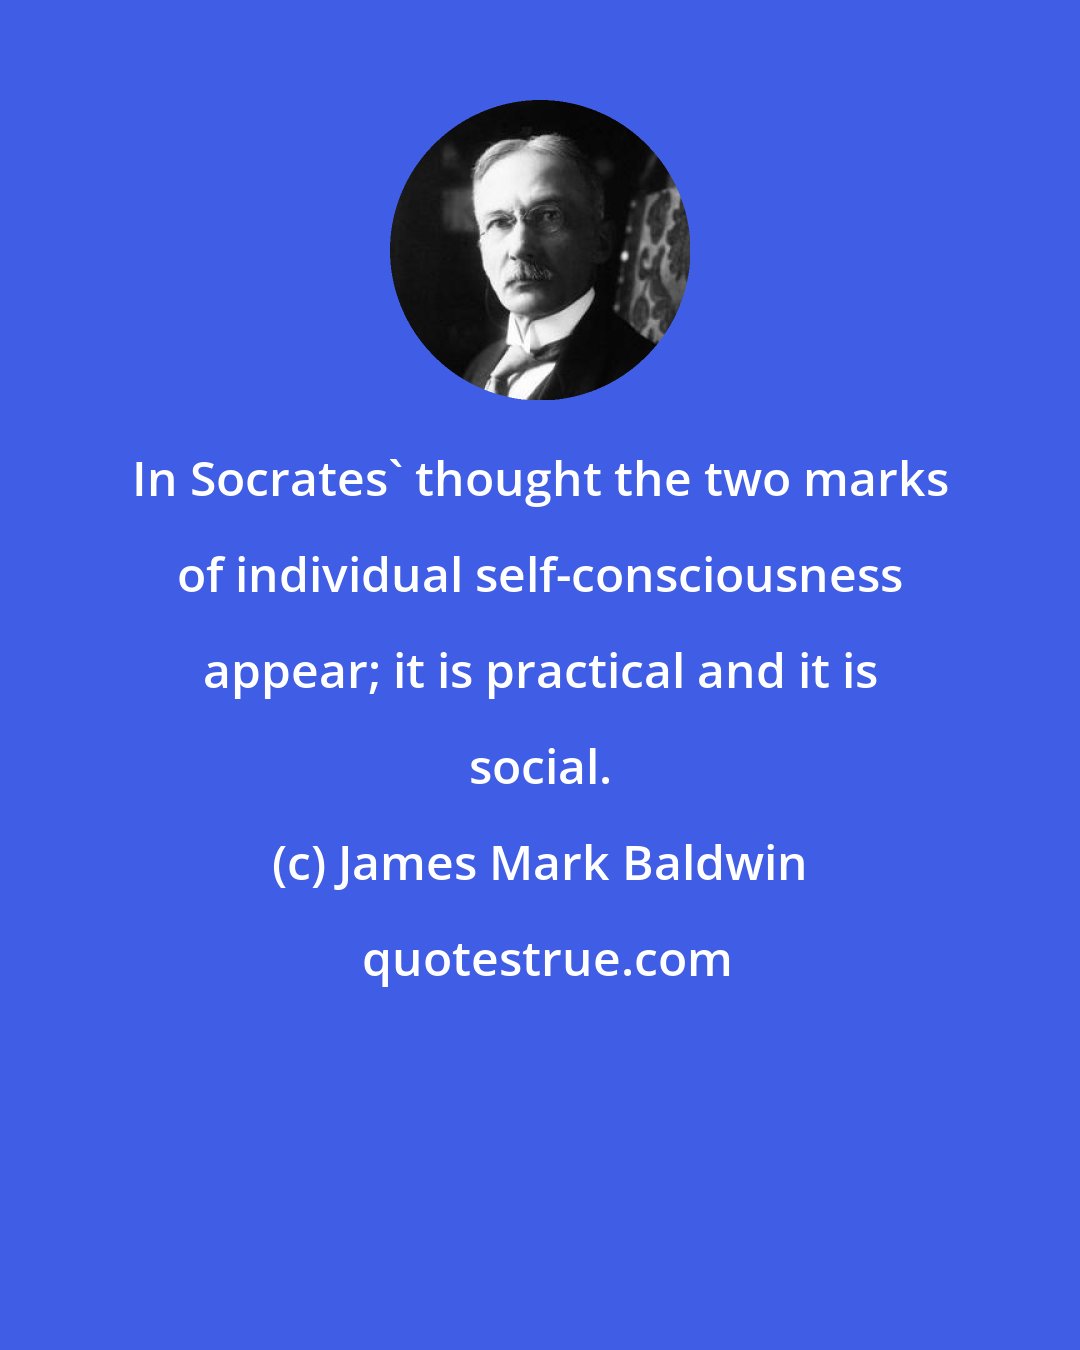 James Mark Baldwin: In Socrates' thought the two marks of individual self-consciousness appear; it is practical and it is social.